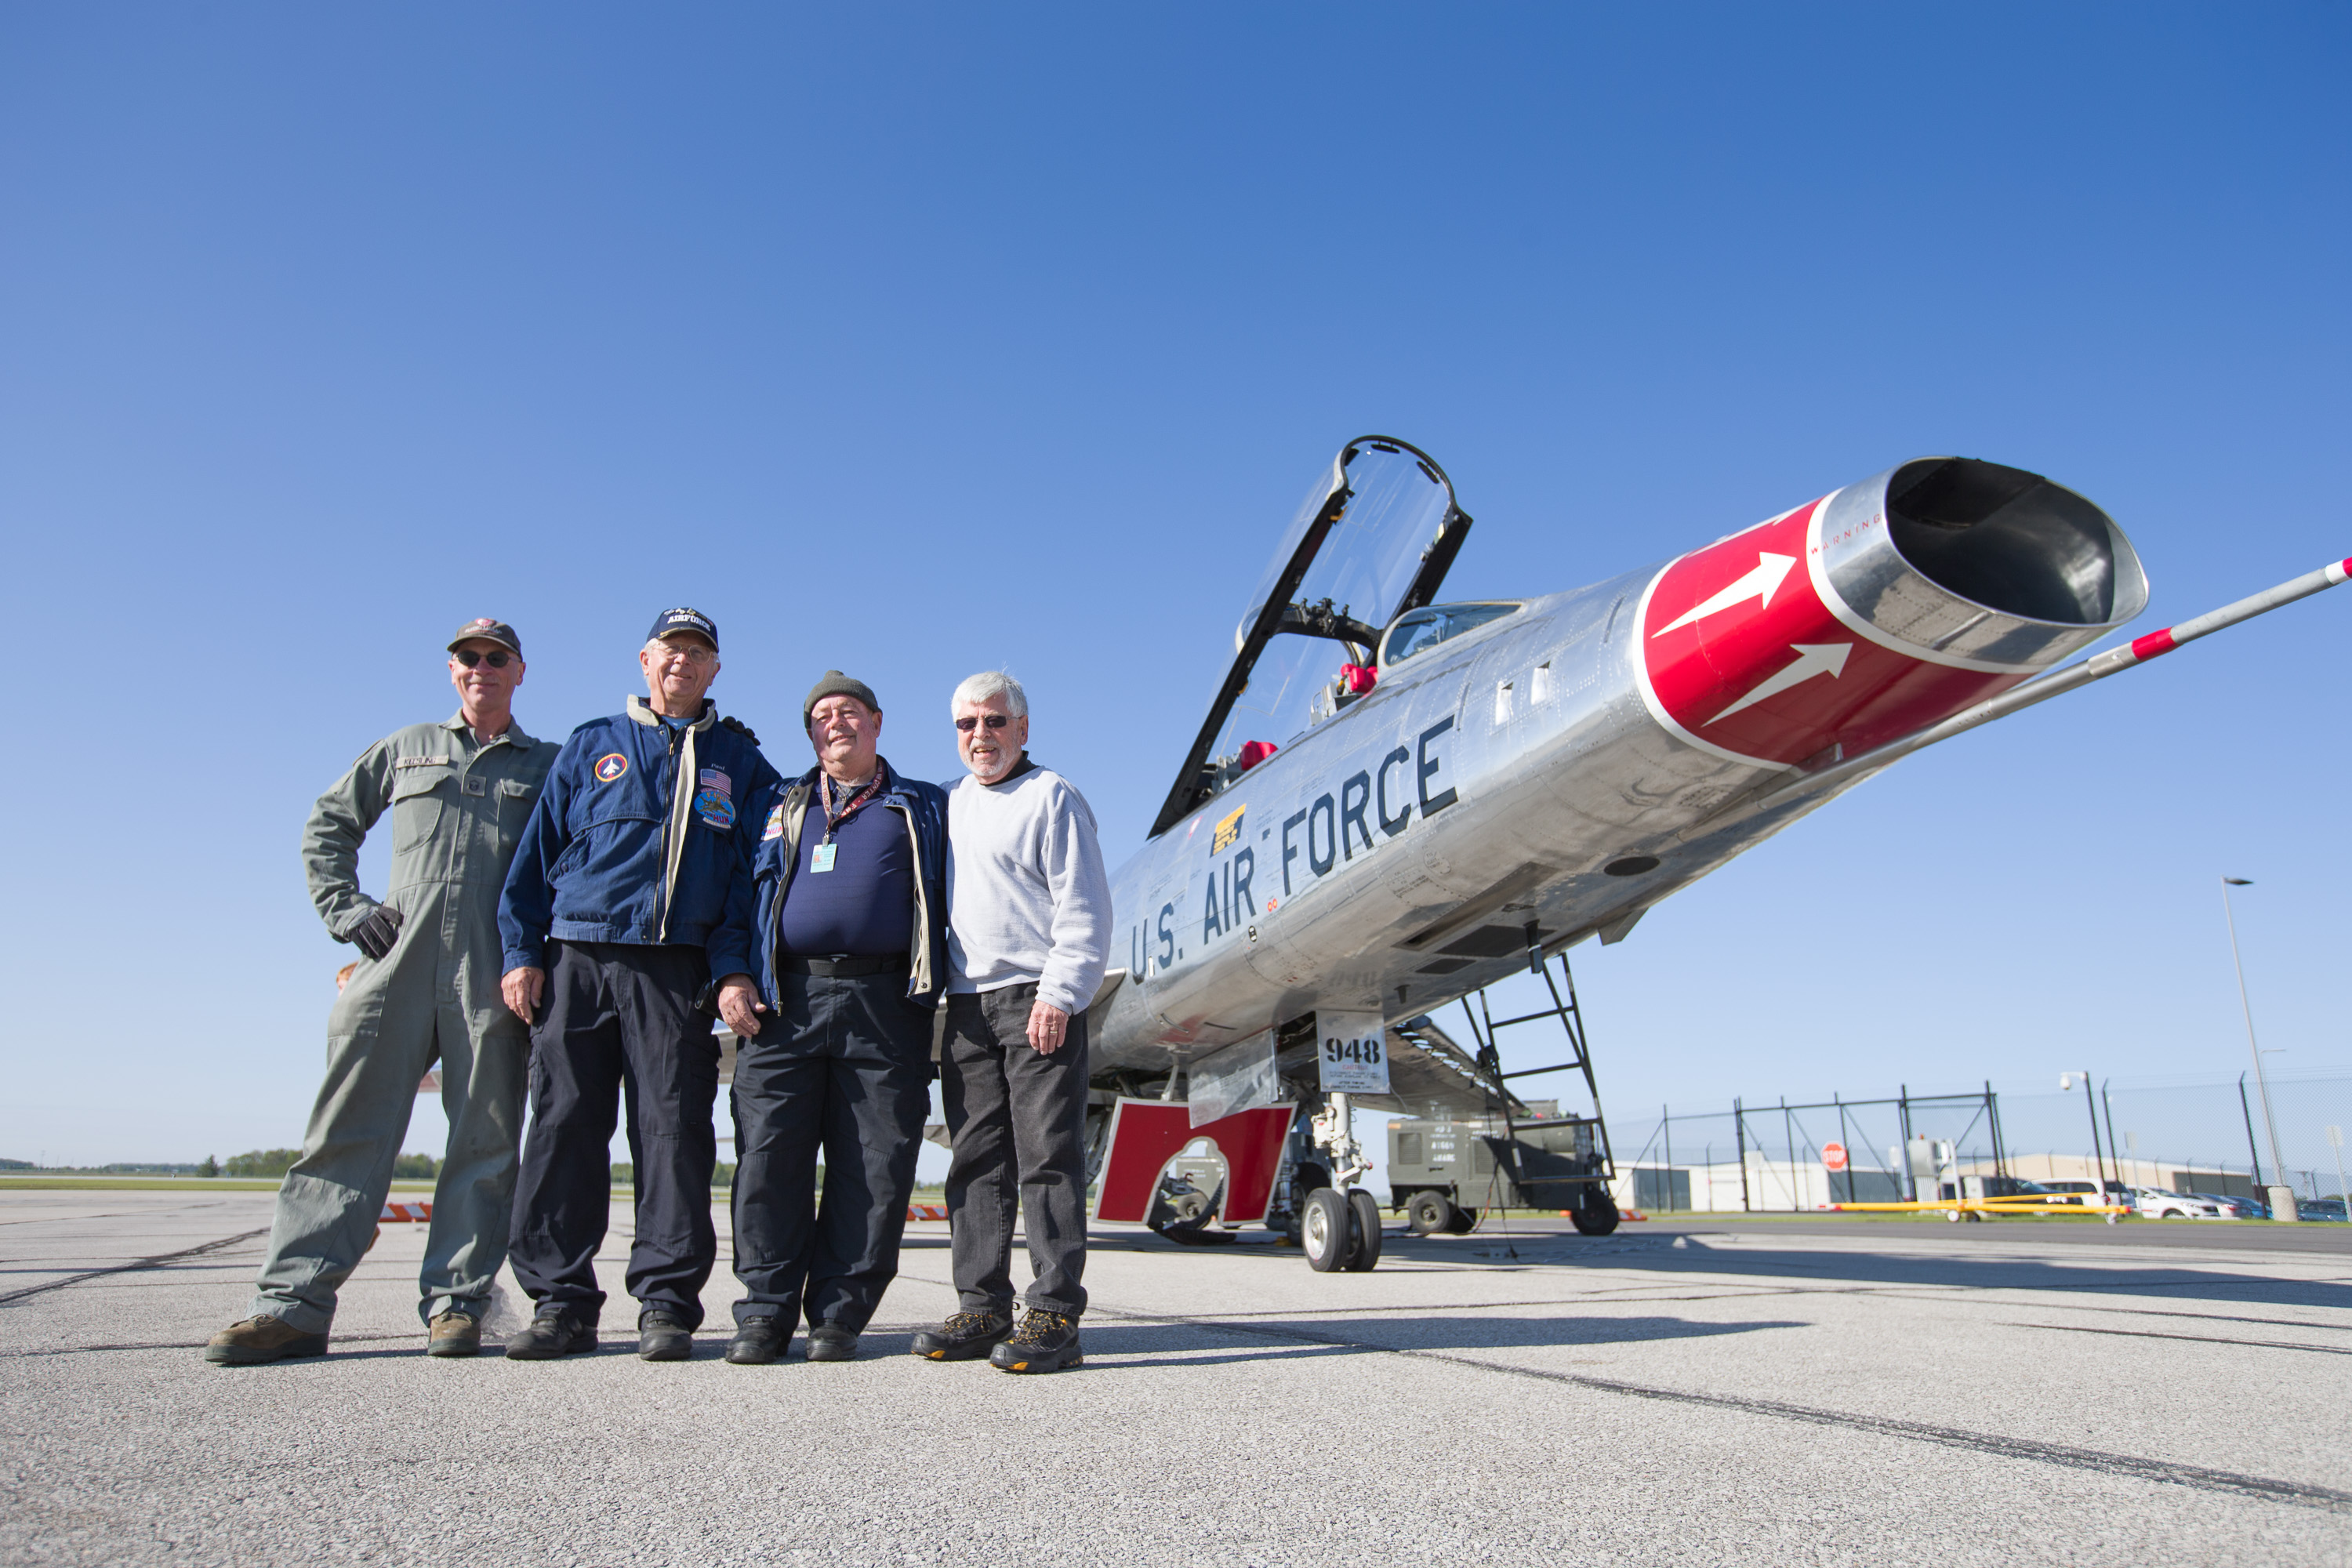 Left to right: Greg Keesling, Paul Swick, Jim Prezbindowski, and Dick Young are crewing the F-100 this week. Photo by Mike Fizer.